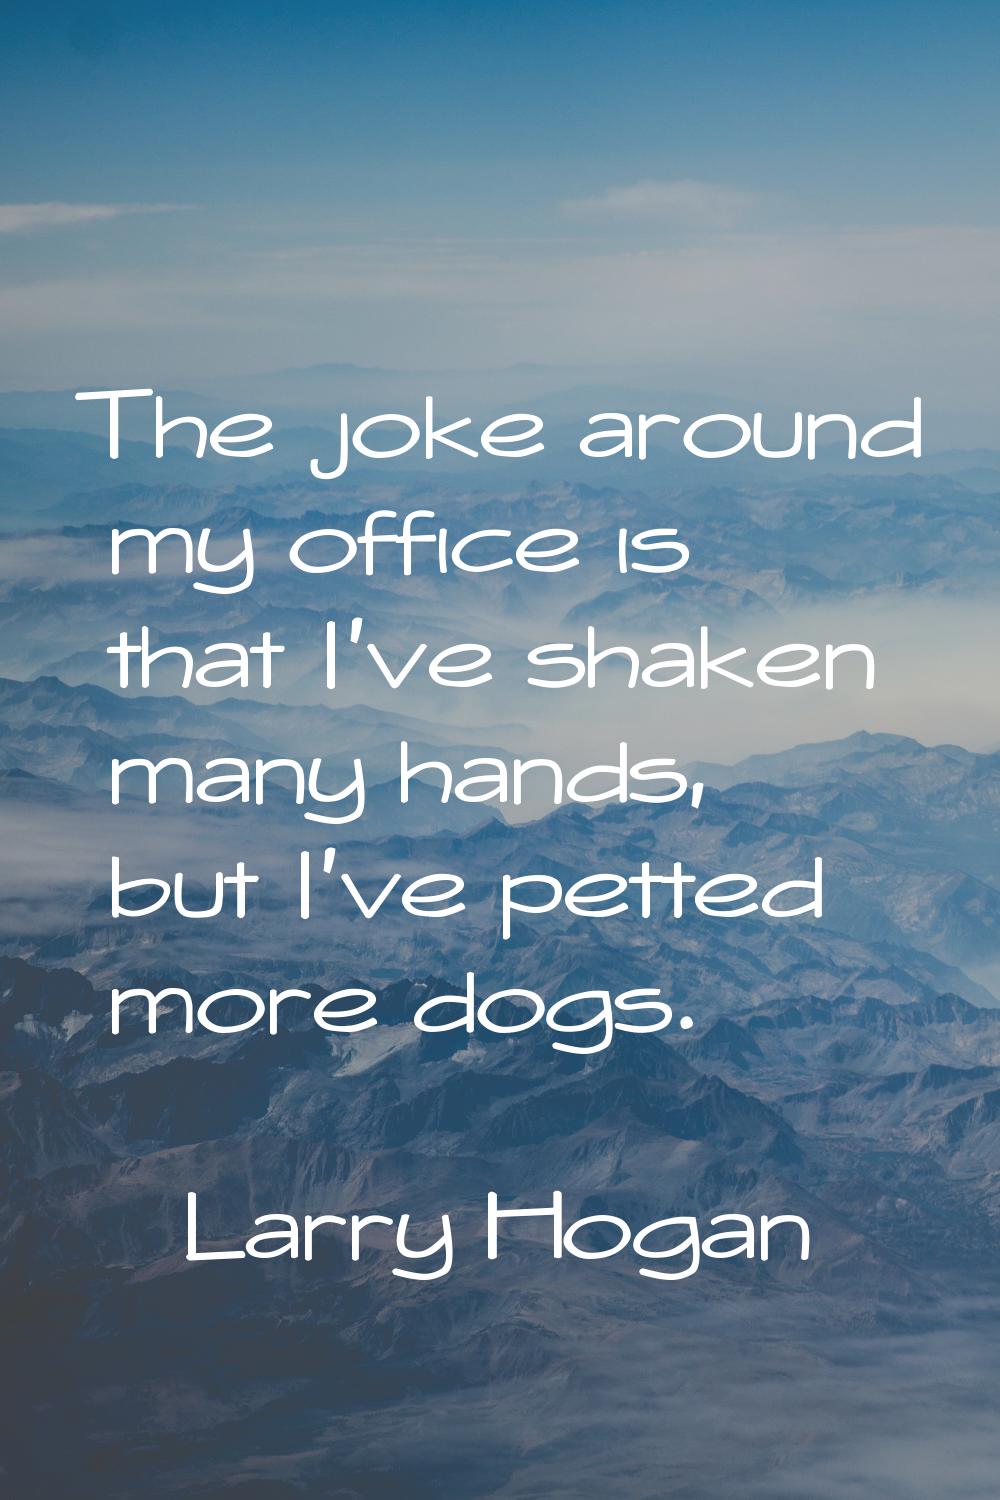 The joke around my office is that I've shaken many hands, but I've petted more dogs.